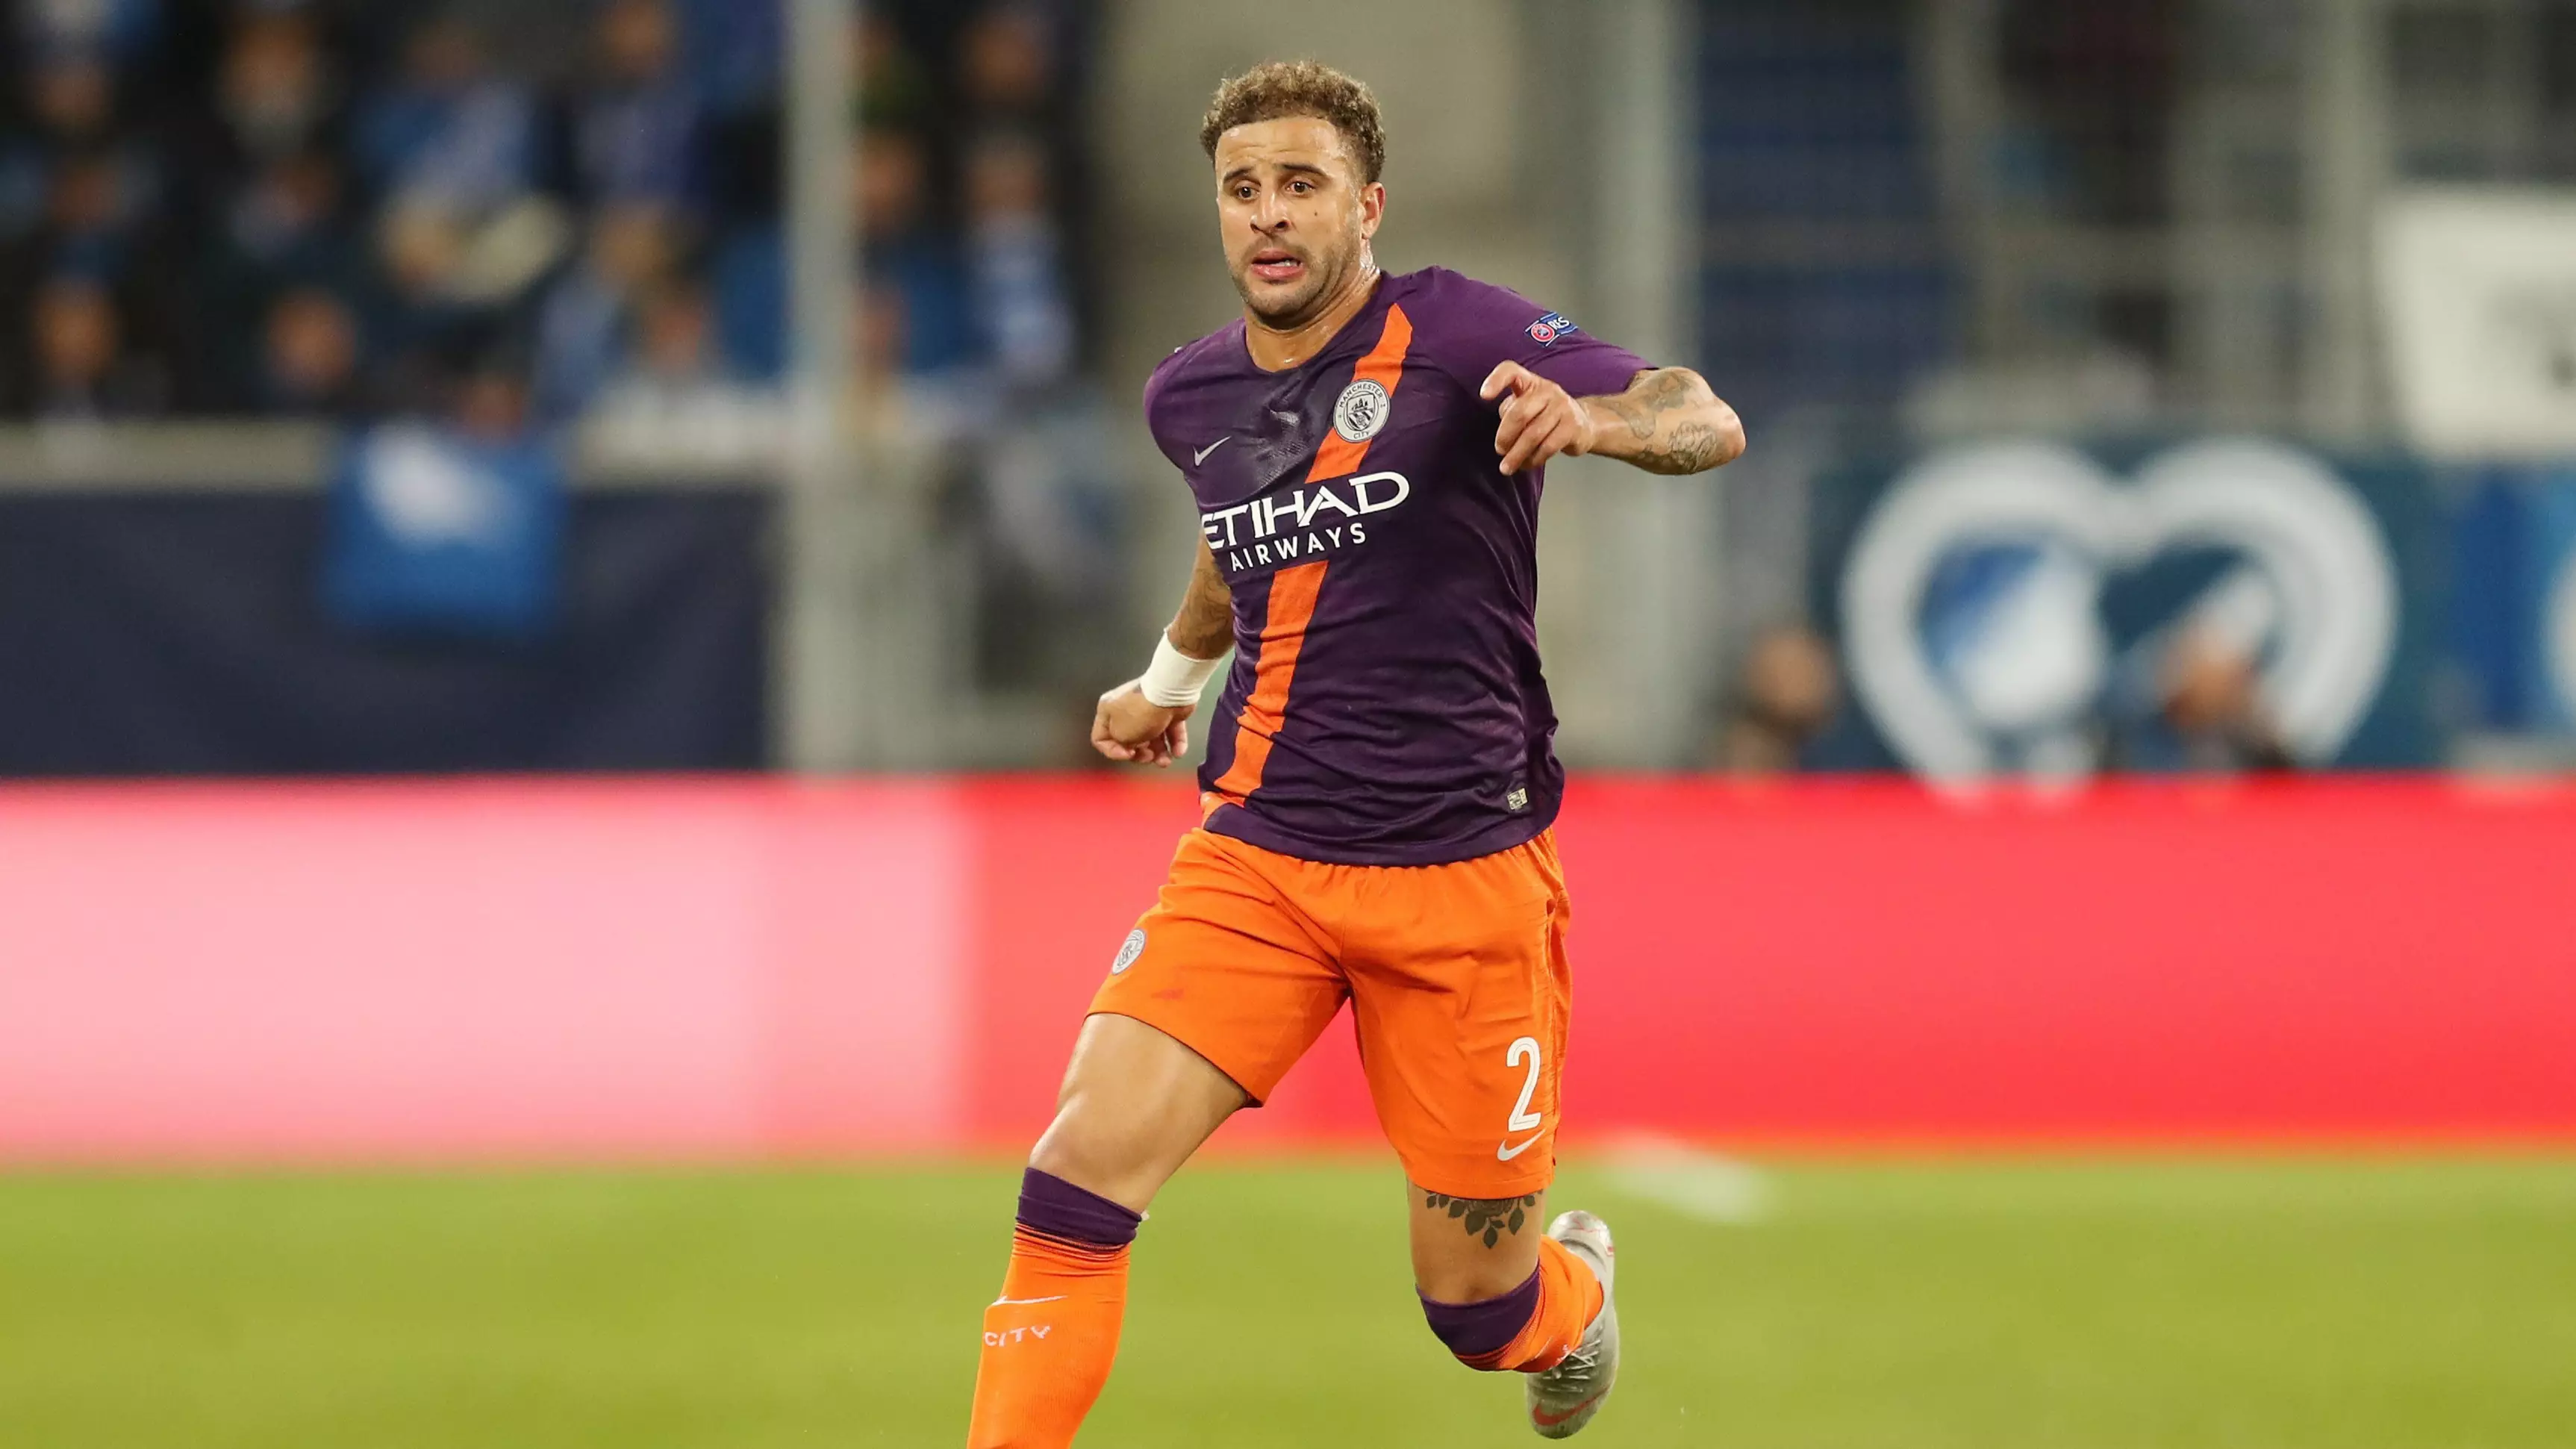 Kyle Walker Comments On Whether He'd Rather Mark Mo Salah Or Sergio Aguero